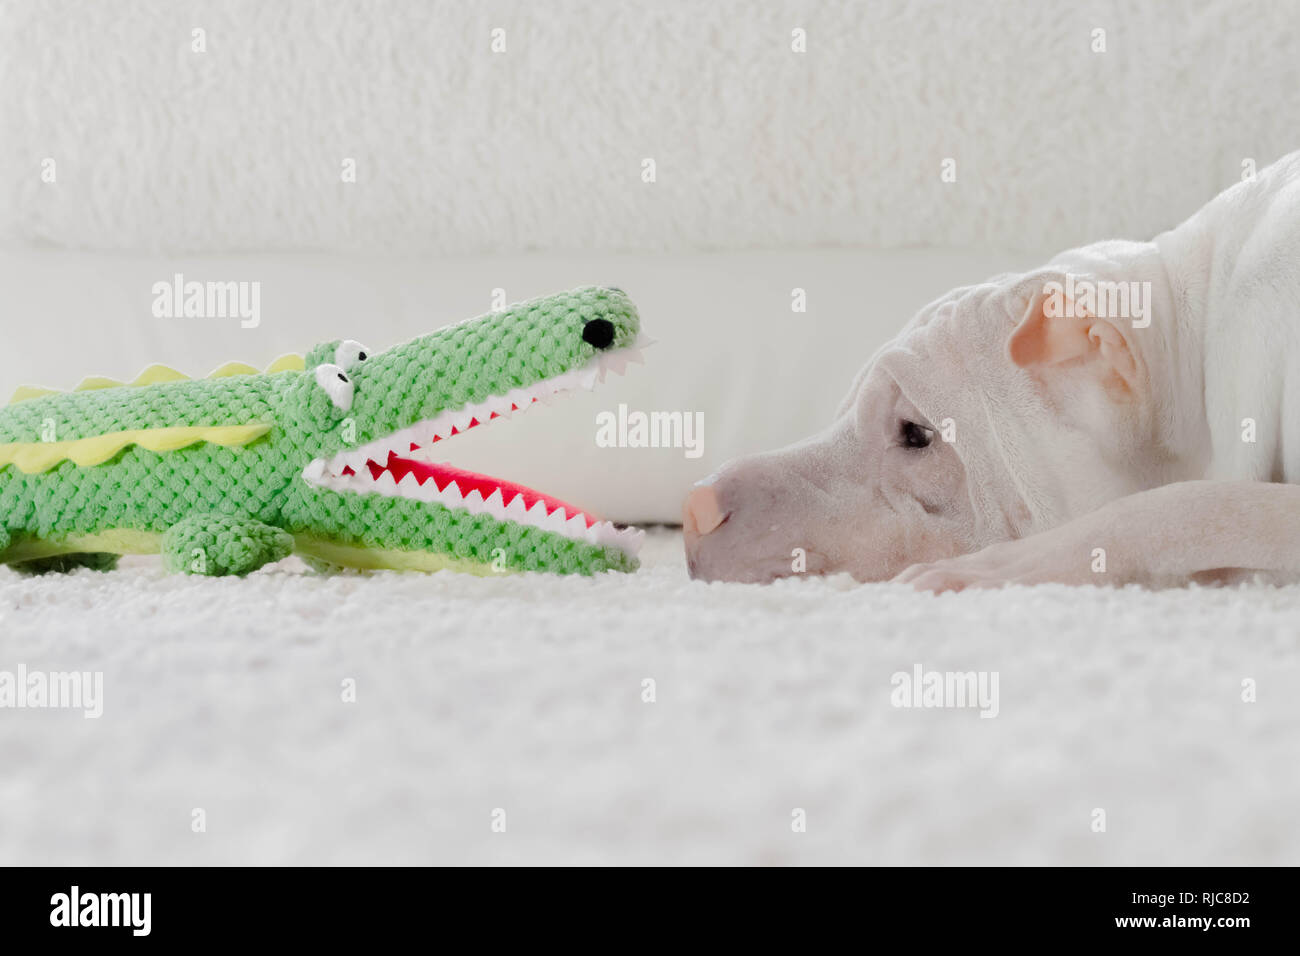 Shar pei dog lying on the floor looking at a toy crocodile Stock Photo